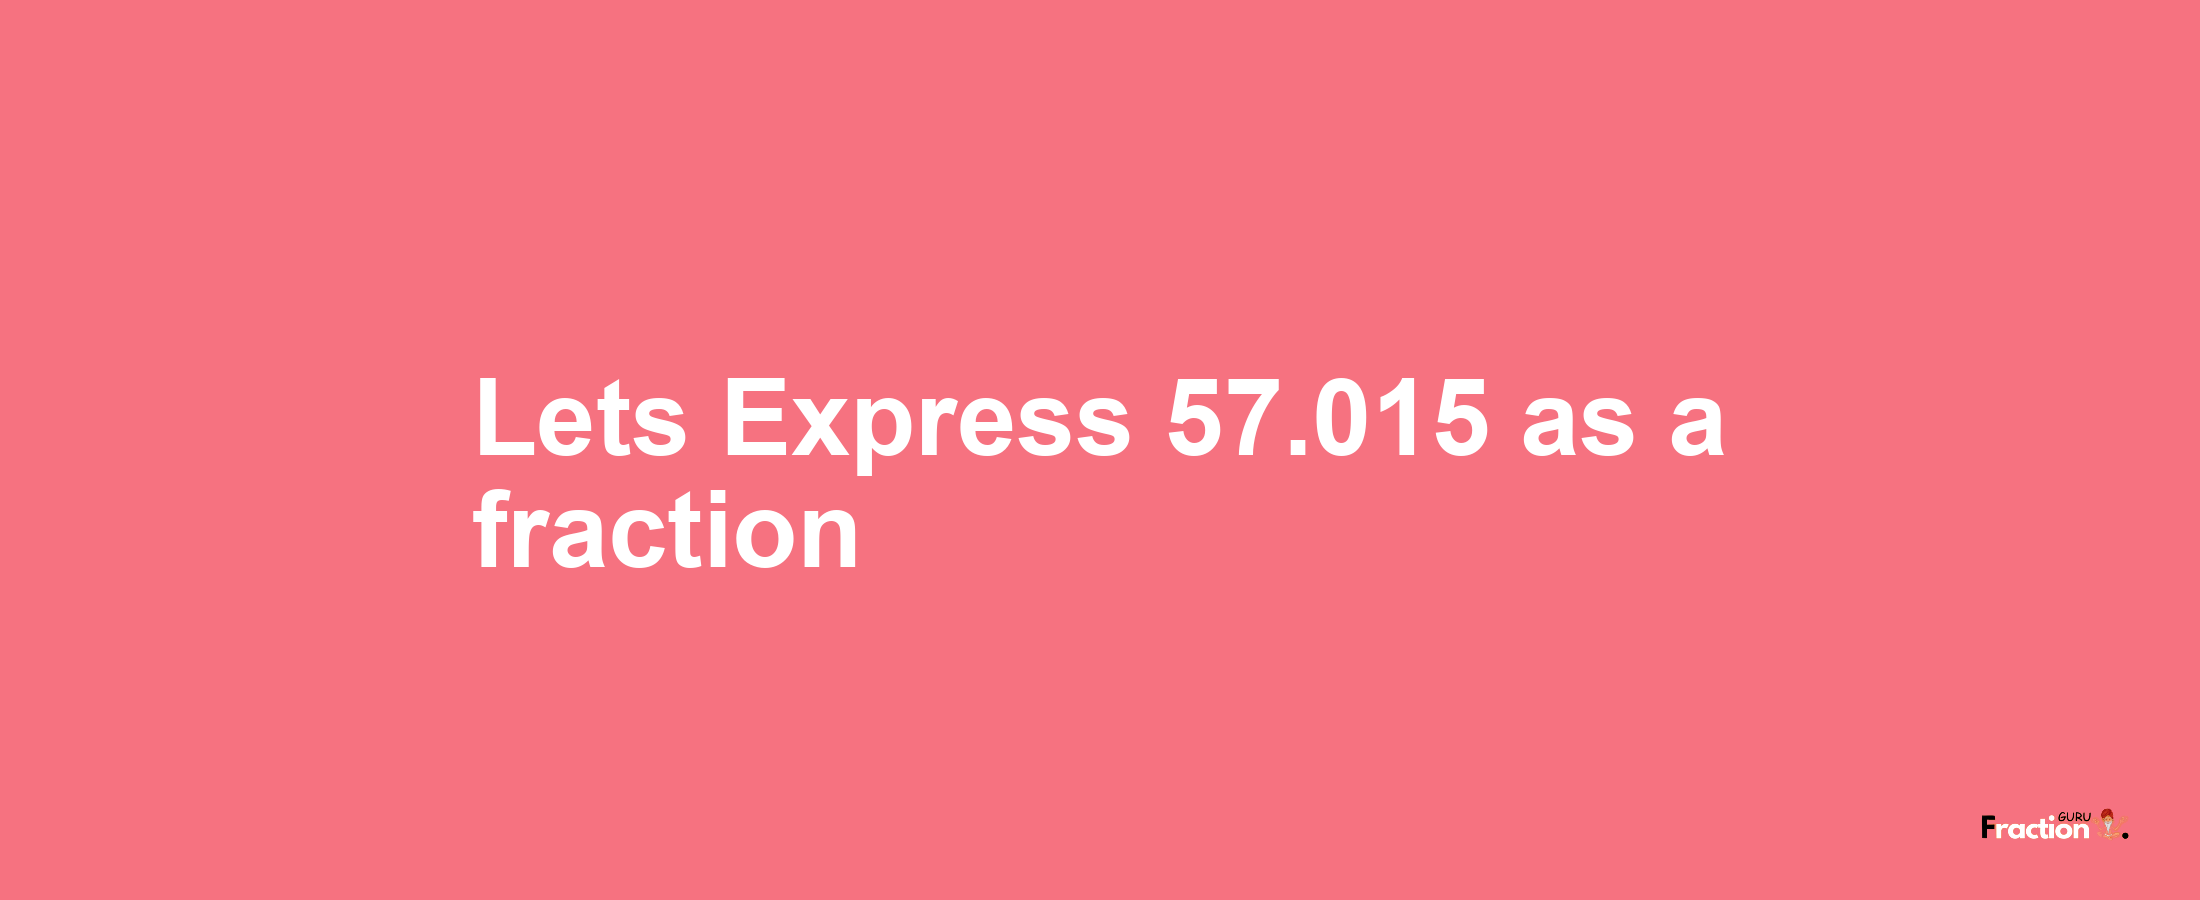 Lets Express 57.015 as afraction